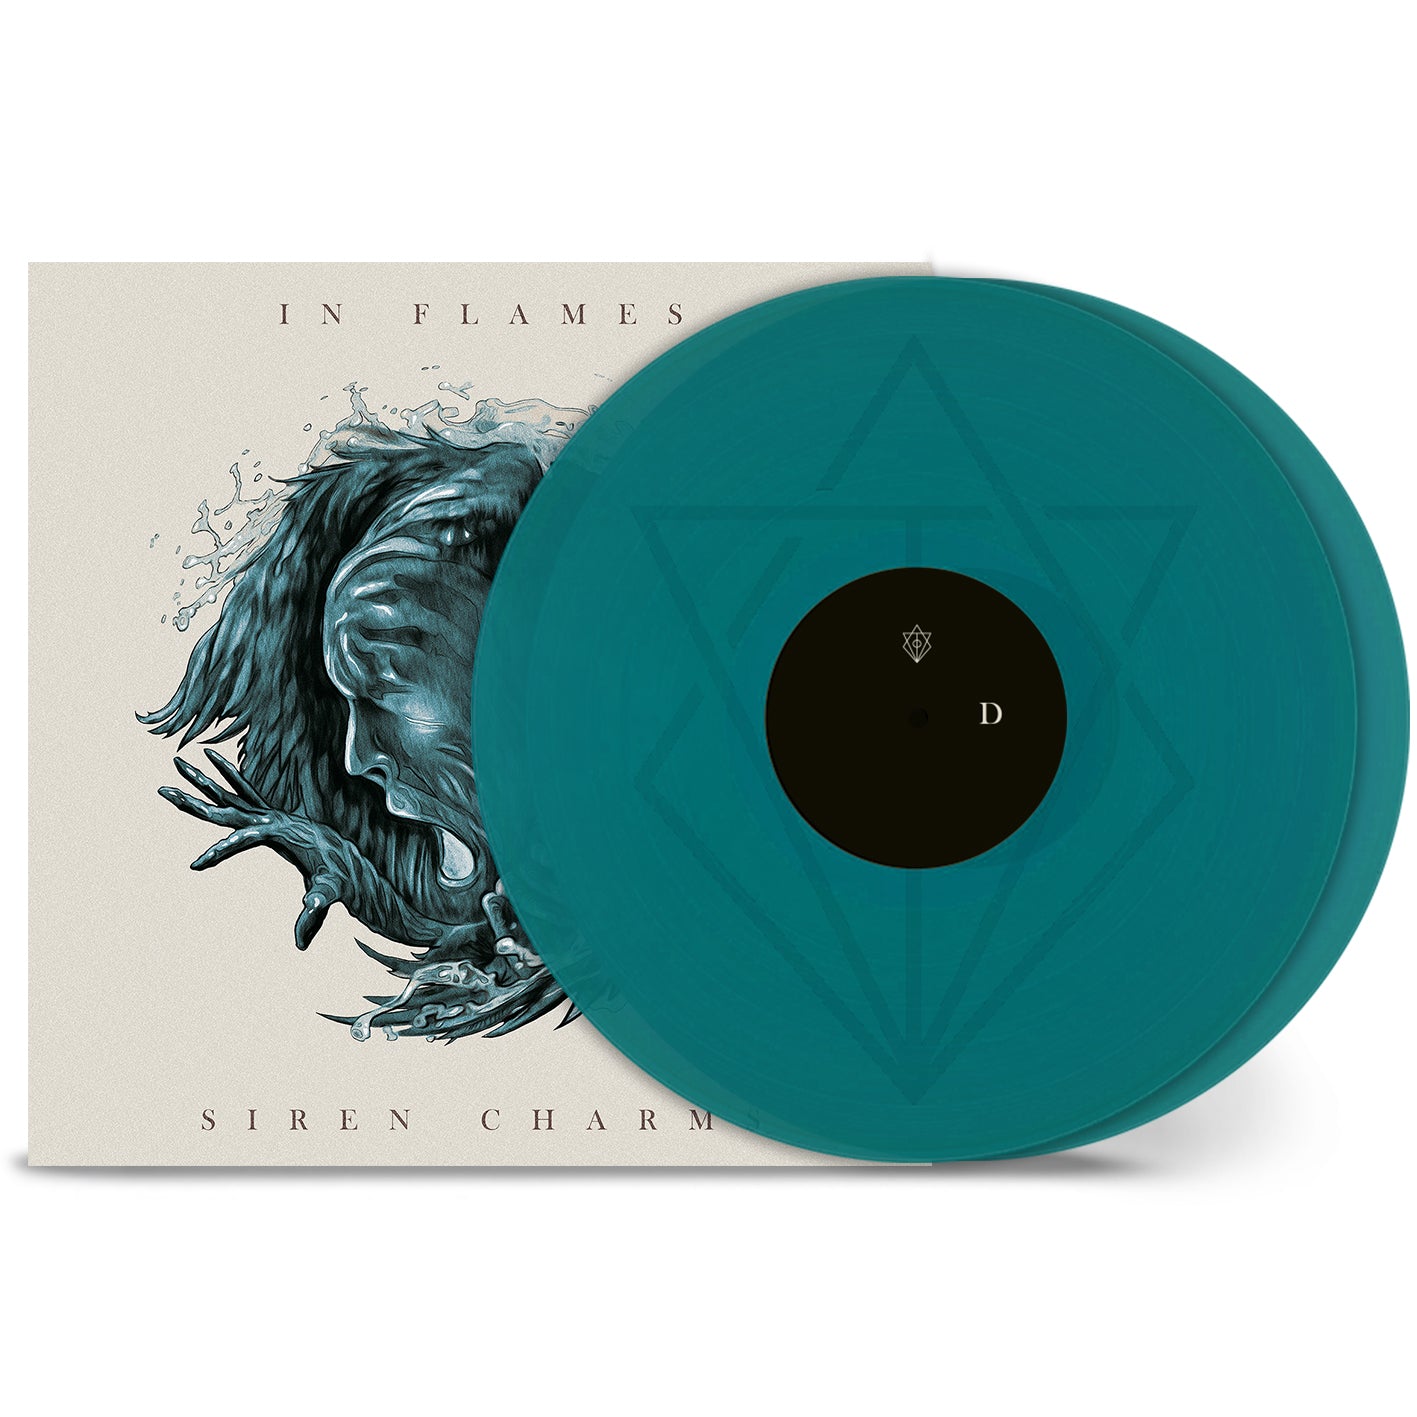 In Flames "Siren Charms (10th Anniversary)" 2x12 Transparent Green Vinyl - PRE-ORDER